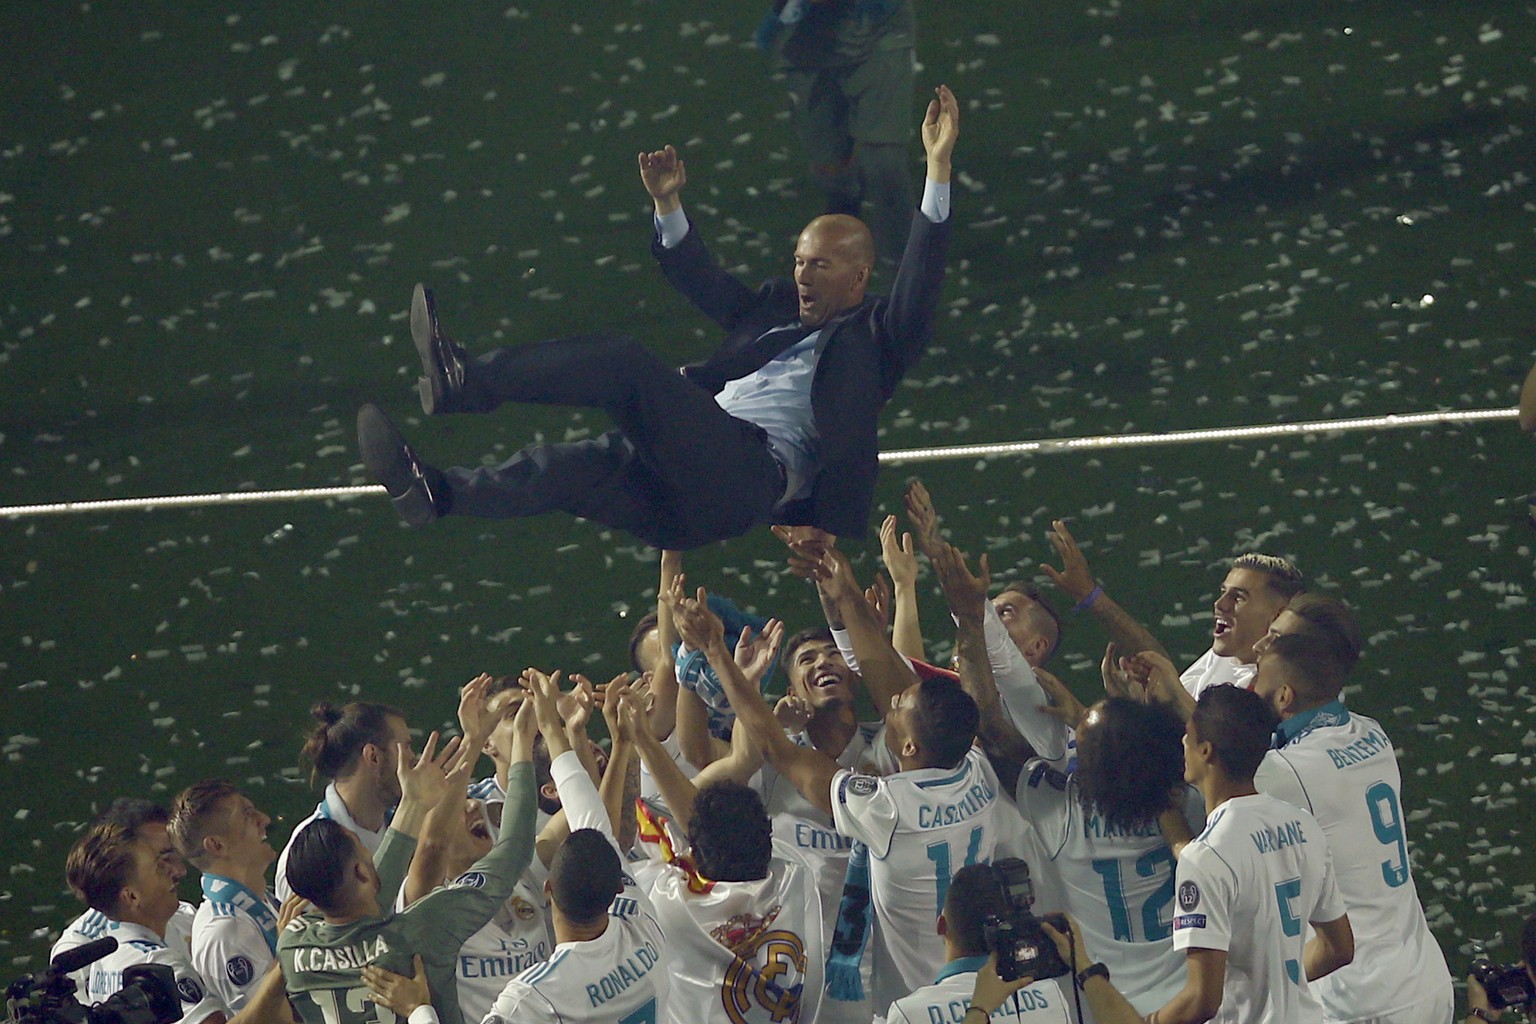 Real Madrid players lift head coach Zinedine Zidane into the air as they celebrate after winning the Champions League final, at the Santiago Bernabeu stadium in Madrid, Spain, Sunday, May 27, 2018. (A ...